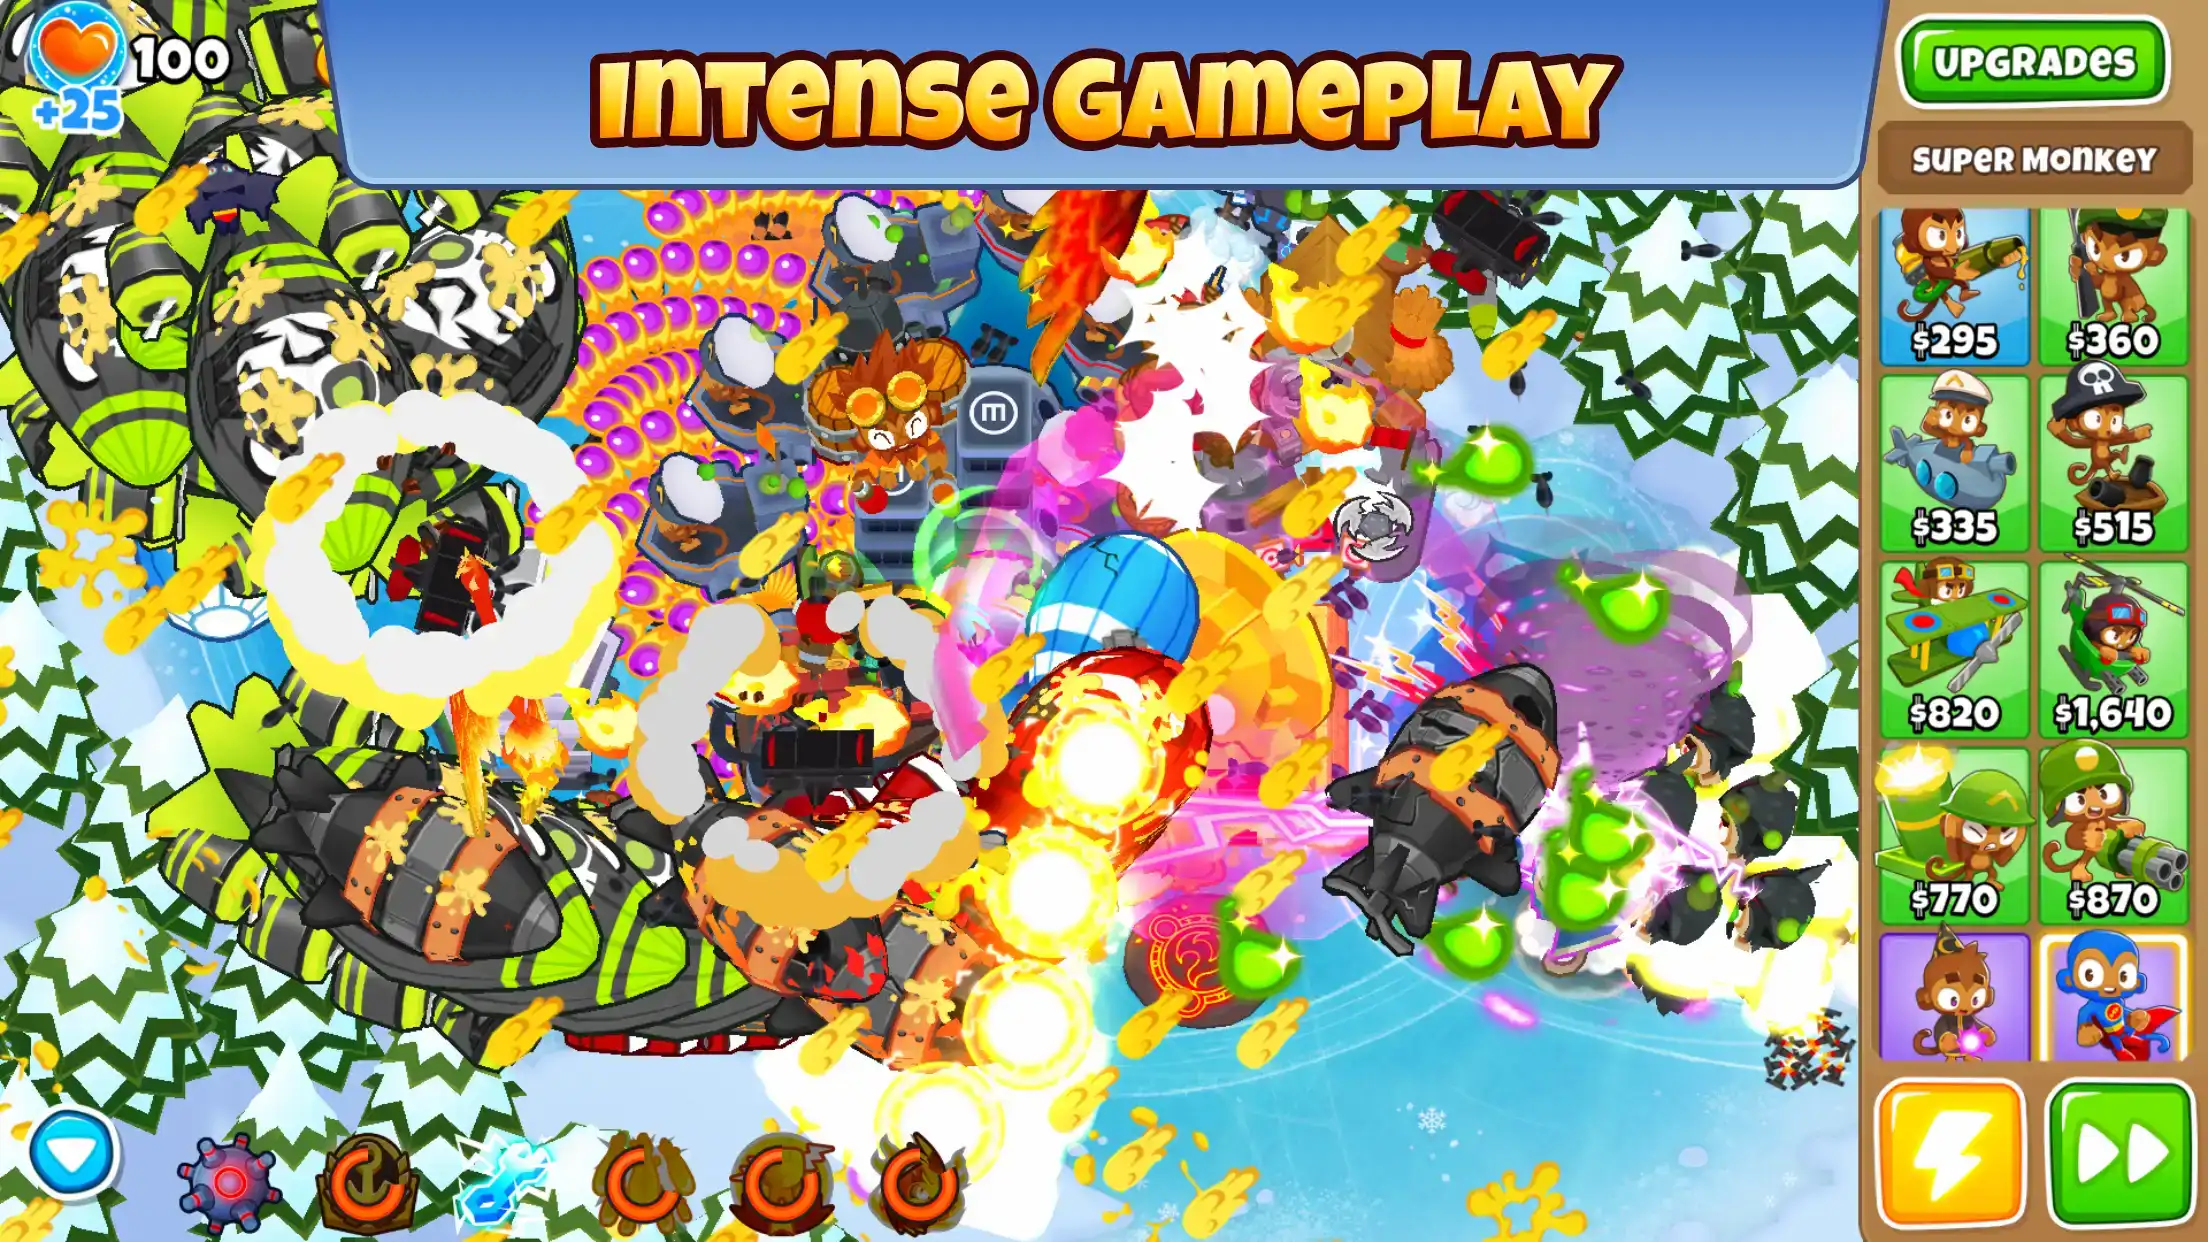 Features of Bloons TD 6 Mod APK